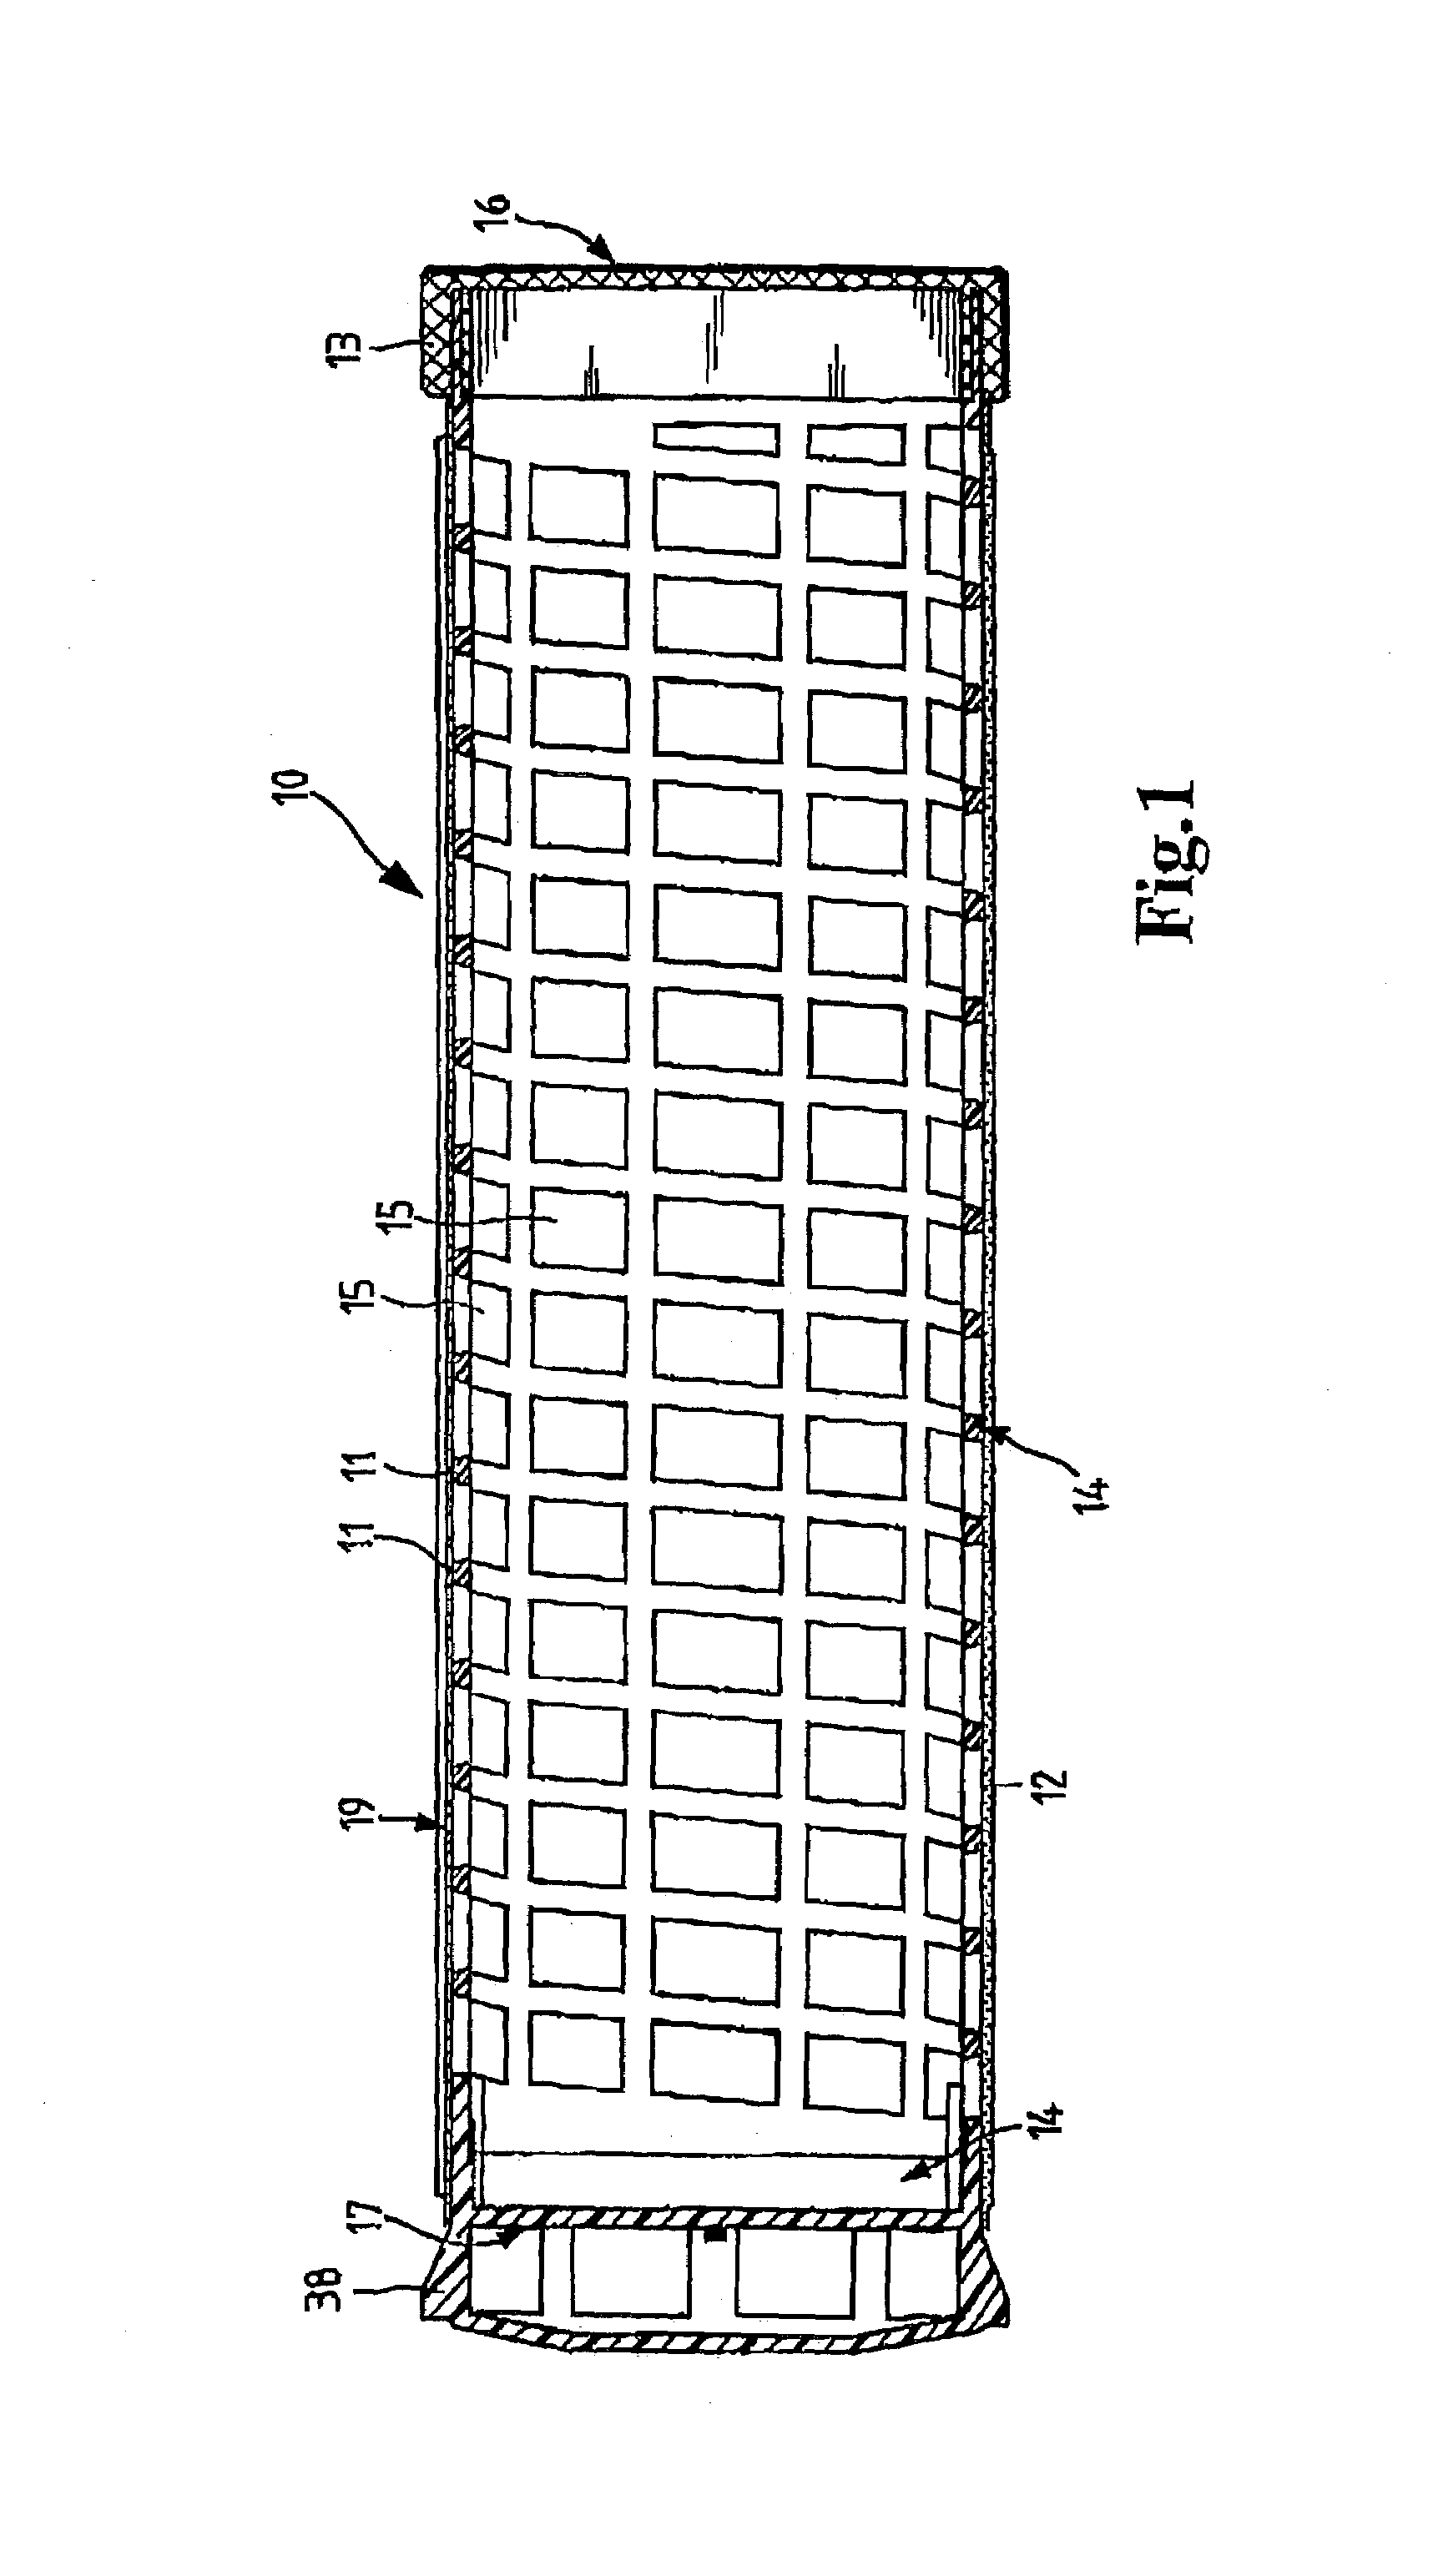 Filter element for filtering a fluid stream